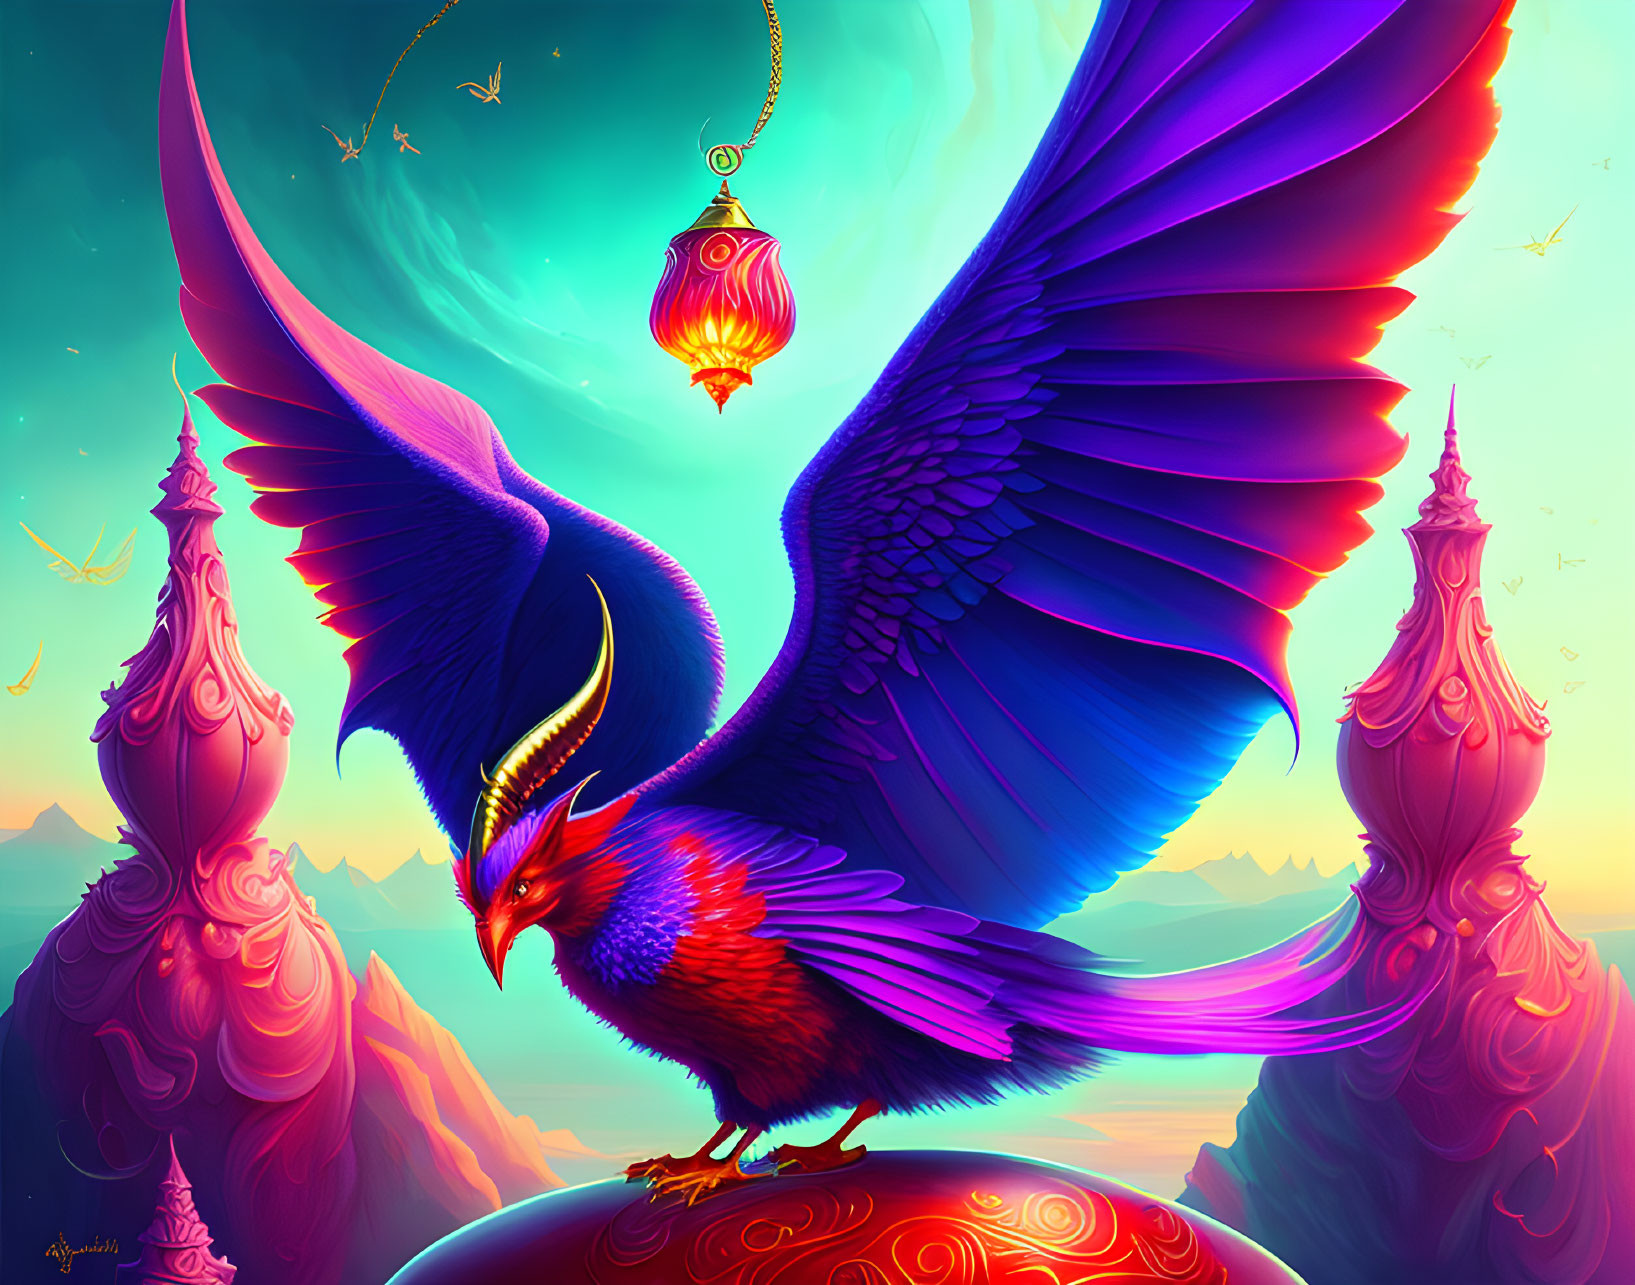 Colorful Phoenix Perched on Sphere with Minarets in Twilight Sky